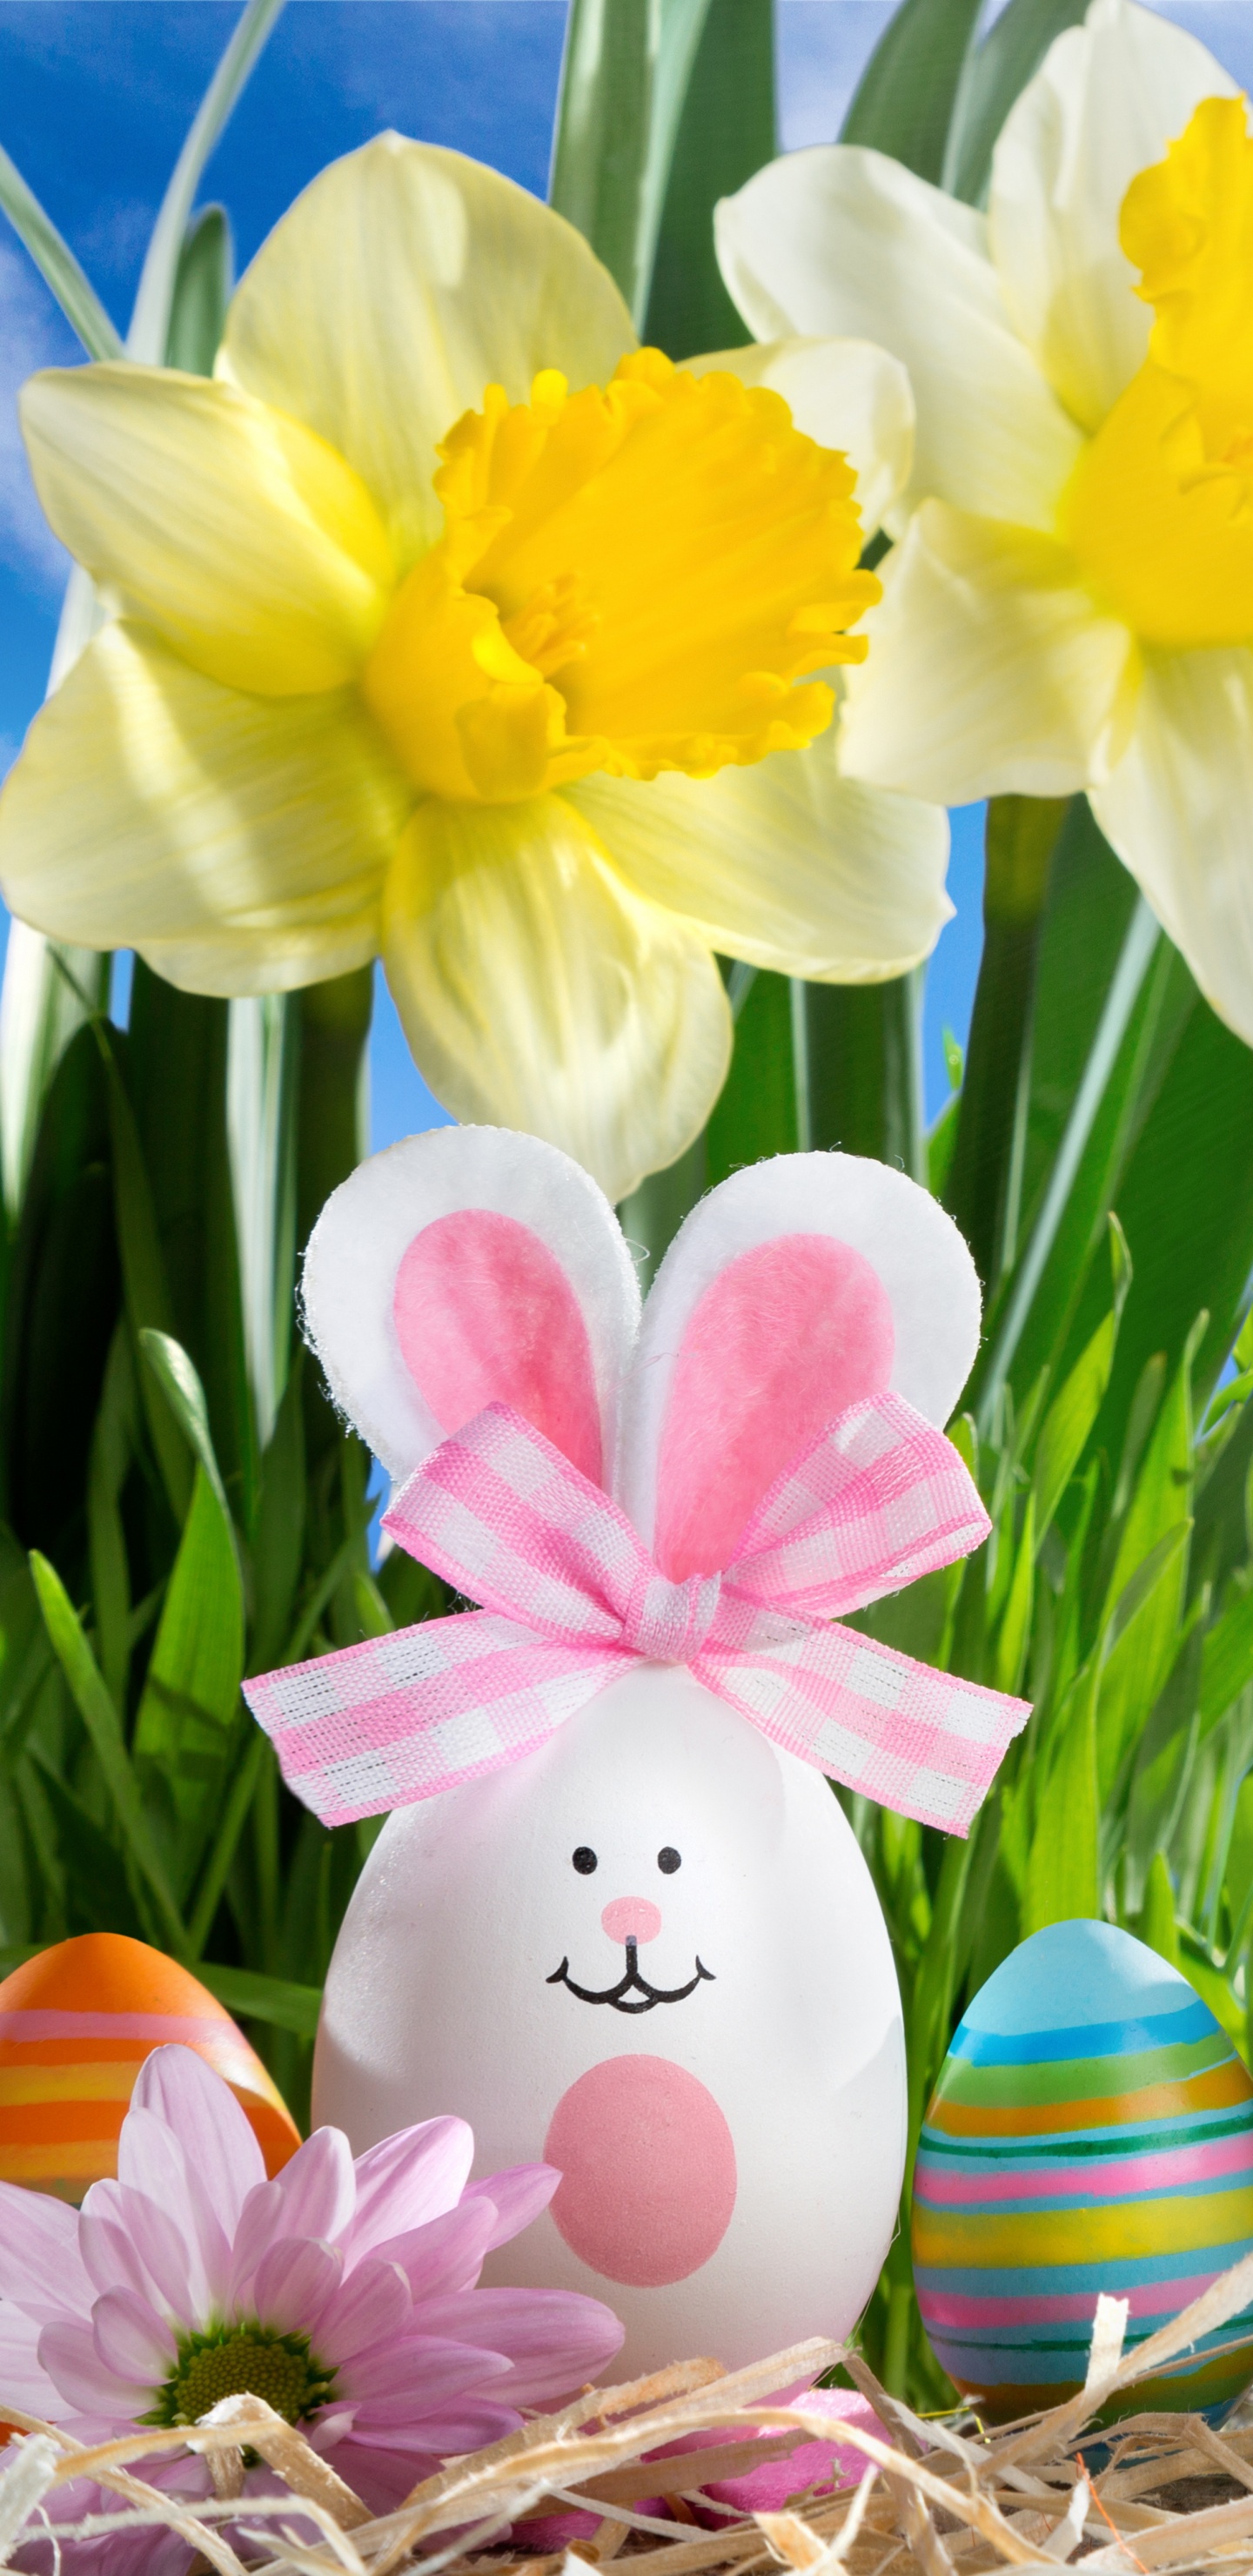 Easter Egg, Spring, Holiday, Easter, Grass. Wallpaper in 1440x2960 Resolution